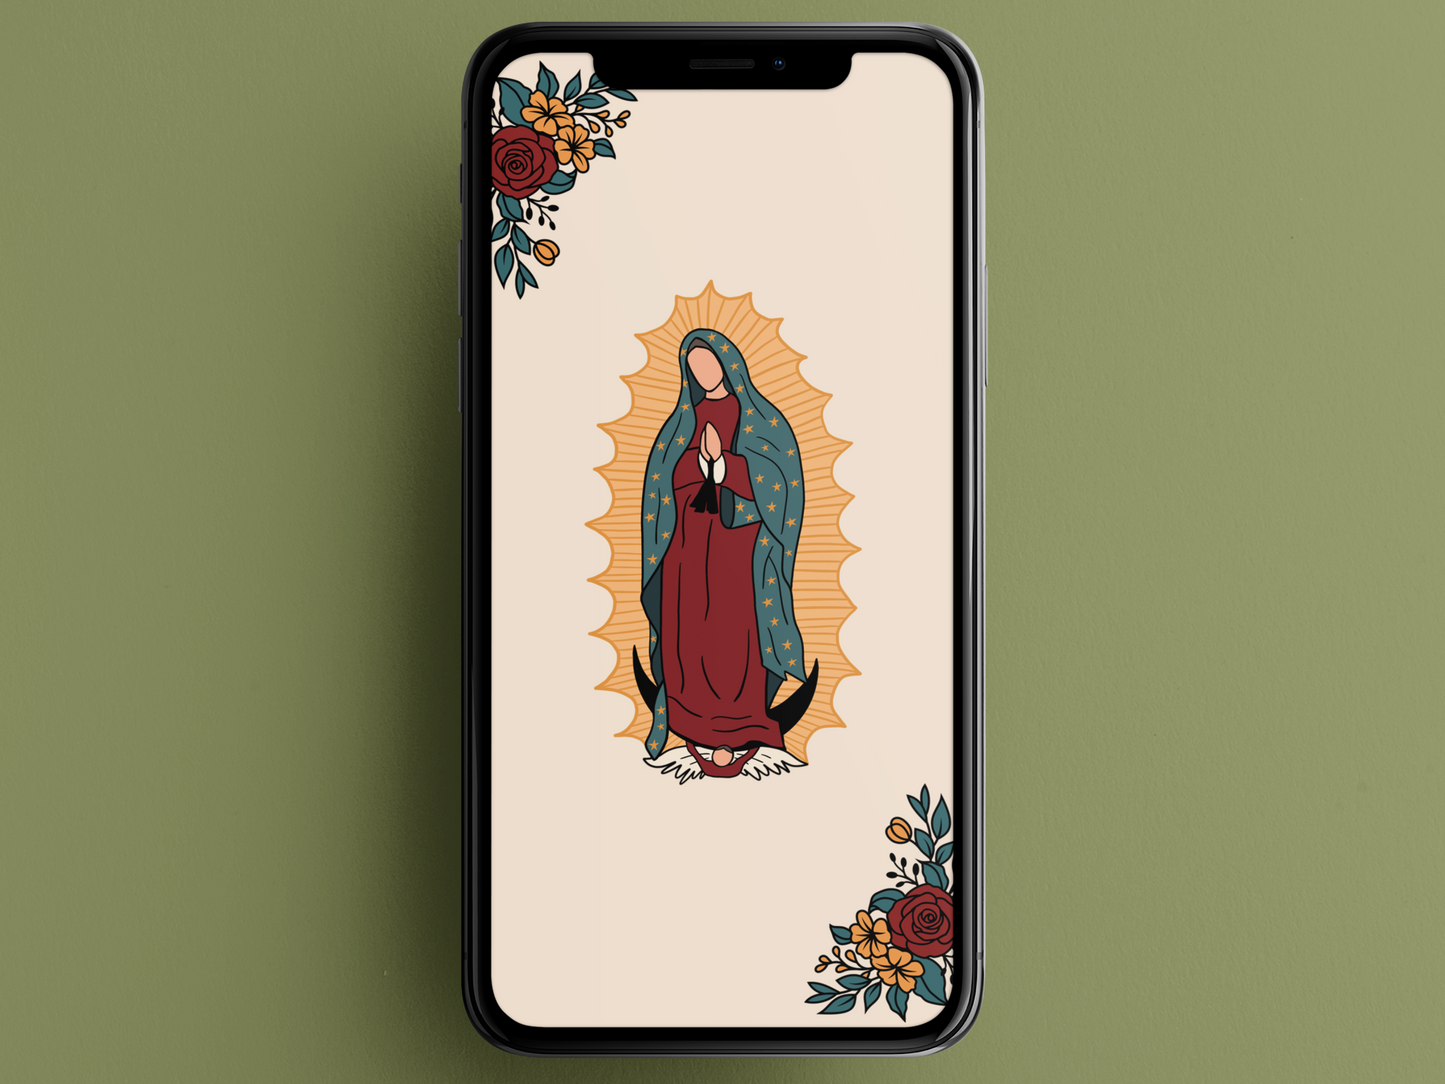 Our Lady of Guadalupe phone wallpaper